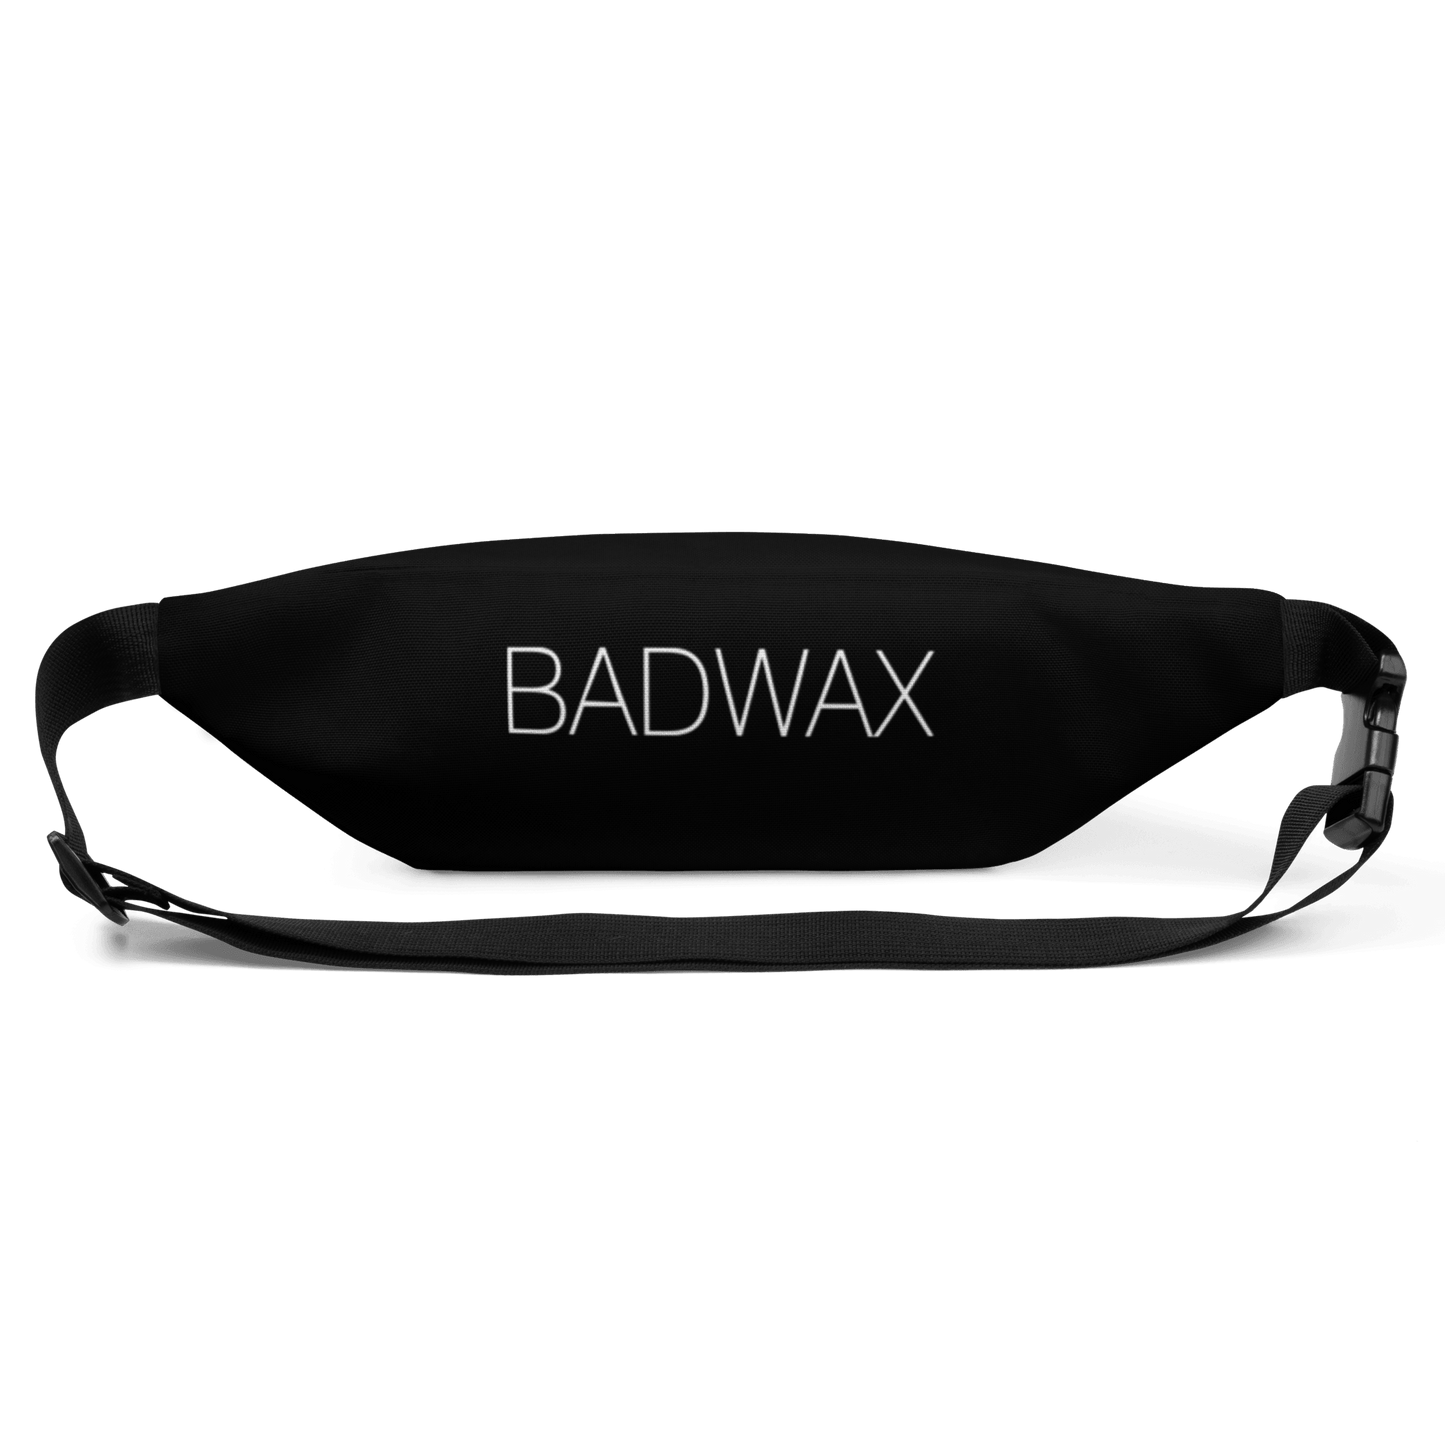 No Drugs Here - Fanny Pack - BADWAX